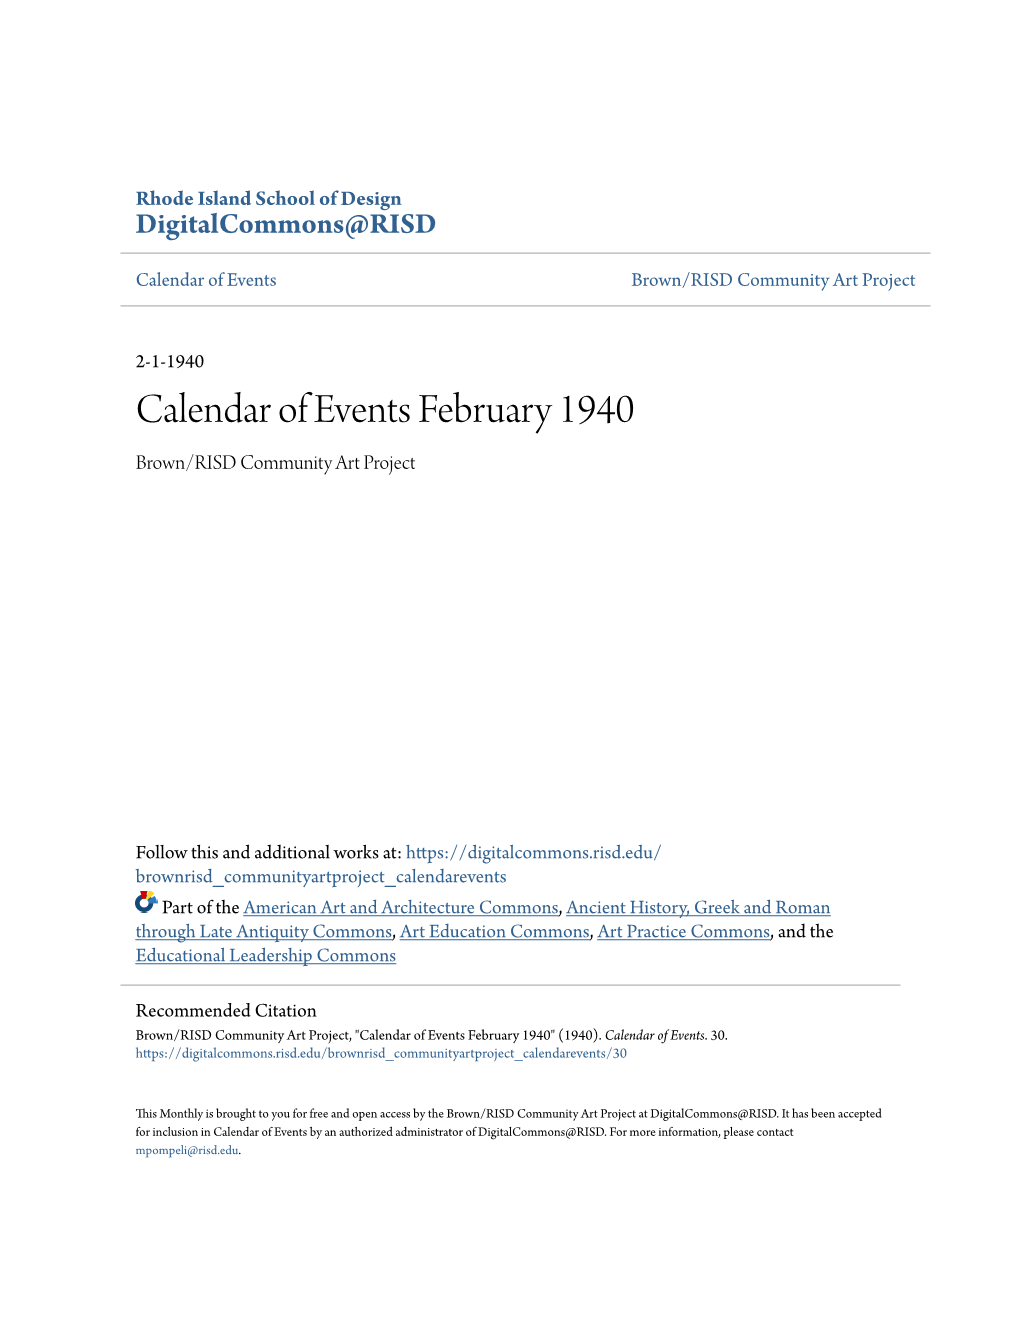 Calendar of Events February 1940 Brown/RISD Community Art Project